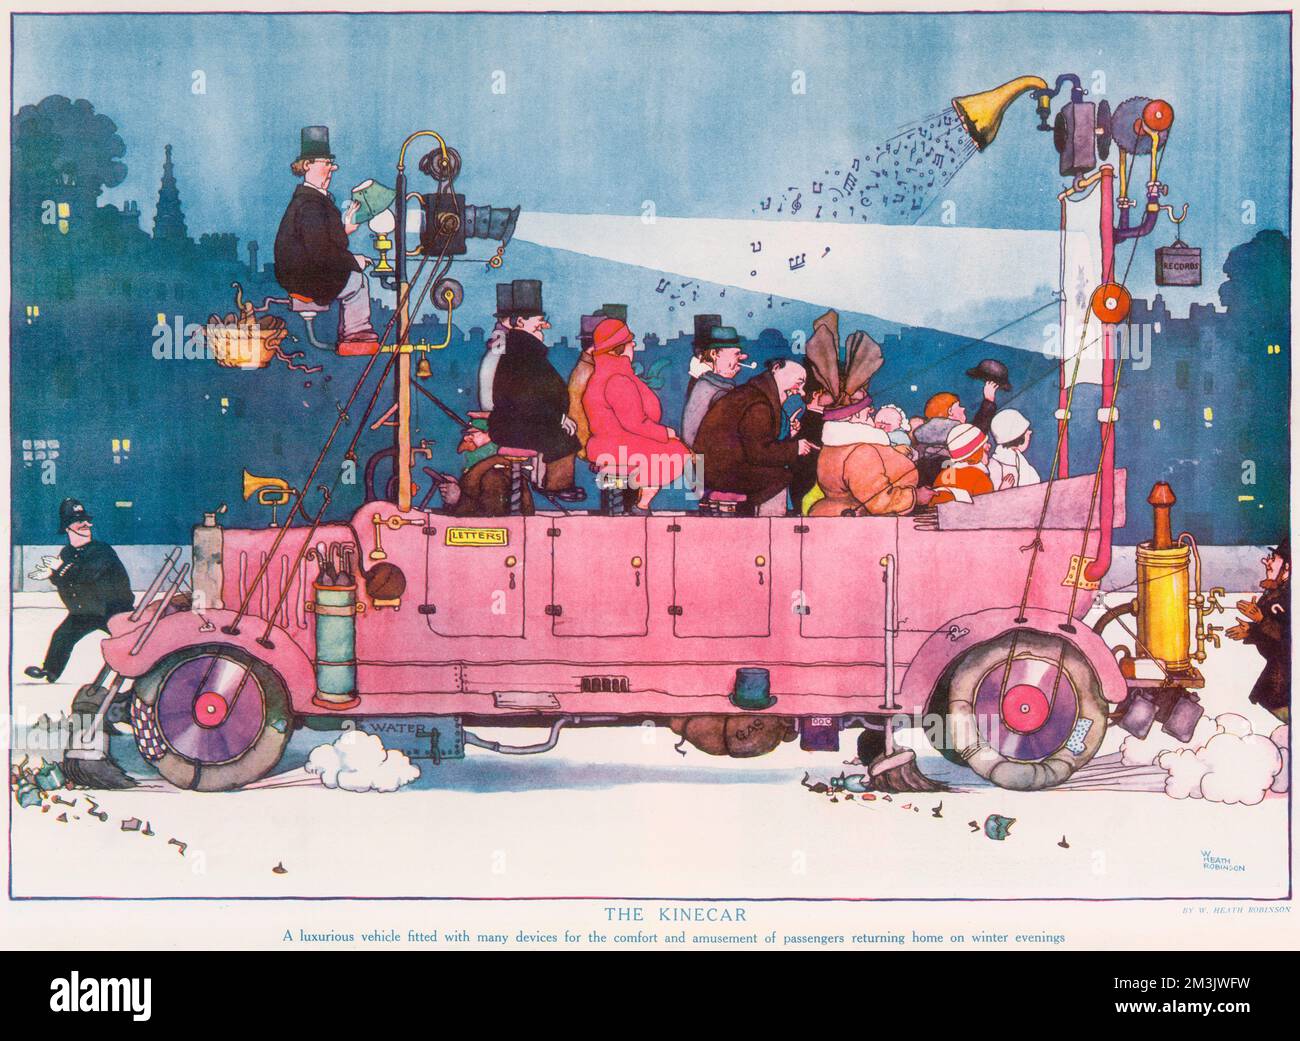 Double page illustration by William Heath Robinson (1872-1944) showing a well-equipped omnibus transporting passengers while they watch a film.  The caption reads,'a luxurious vehicle fitted with many devices for the comfort of passengers returning home on a winter's evening', an interesting (and true) forecast for the future of travel.  Robinson was a regular contributor to the Sketch, the Bystander and other ILN titles during his lifetime.  His weekly drawings featuring mind-boggling contraptions and designs were immensely popular.  Please note: Credit must appear as  Courtesy of the esta Stock Photo